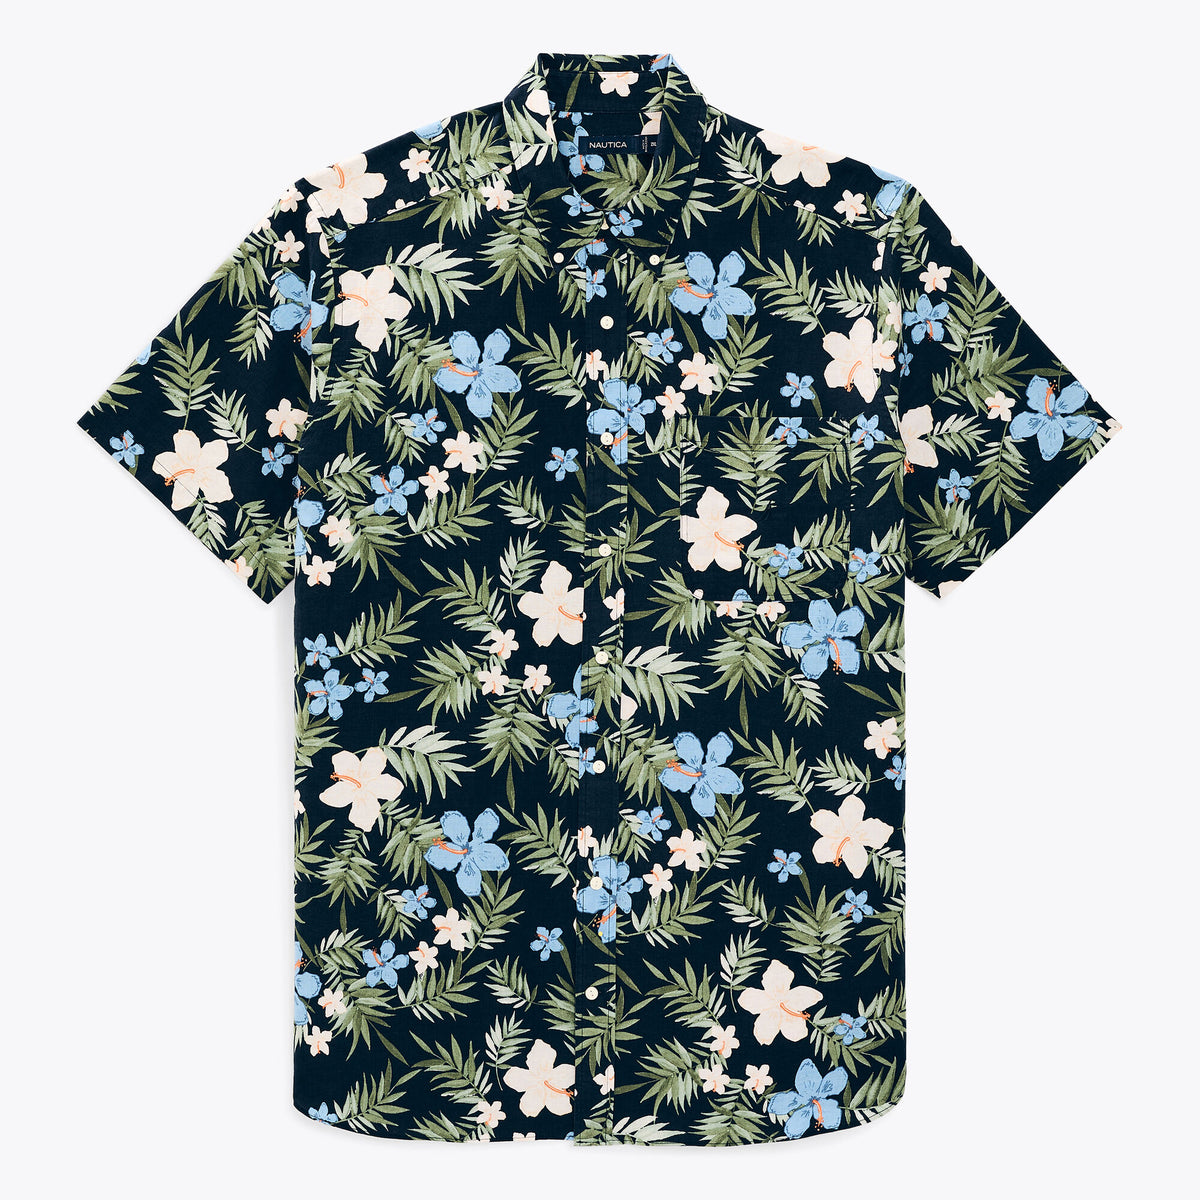 Nautica Men's Big & Tall Sustainably Crafted Floral-Print Linen Short-Sleeve Shirt Navy